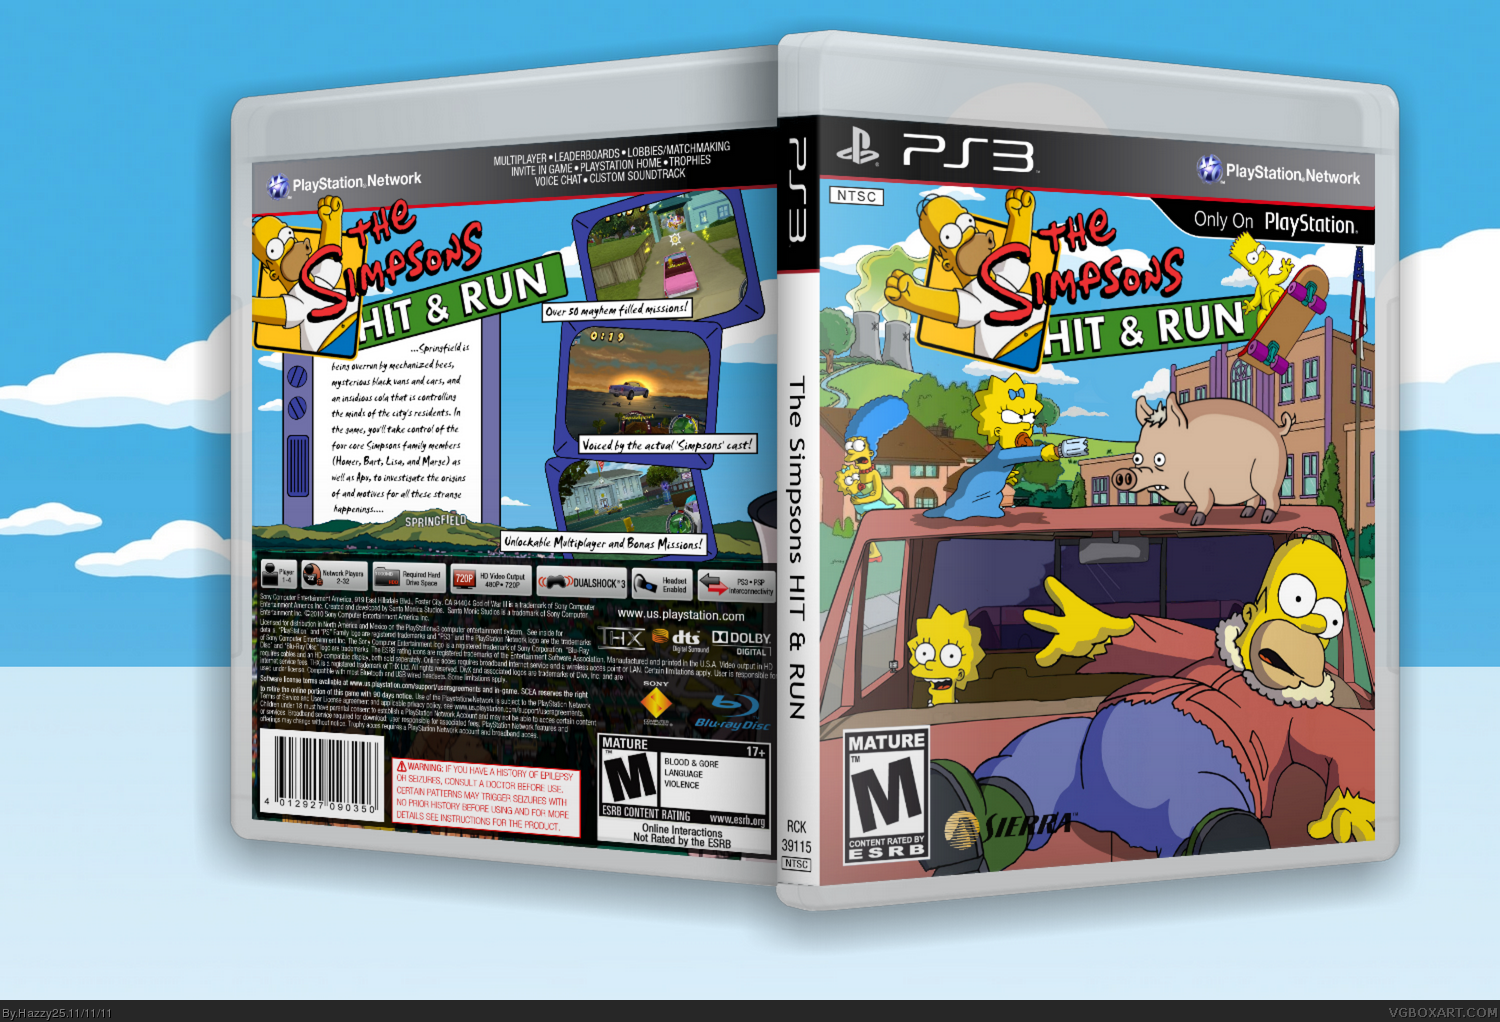 Viewing full size The Simpsons Hit & Run box cover.